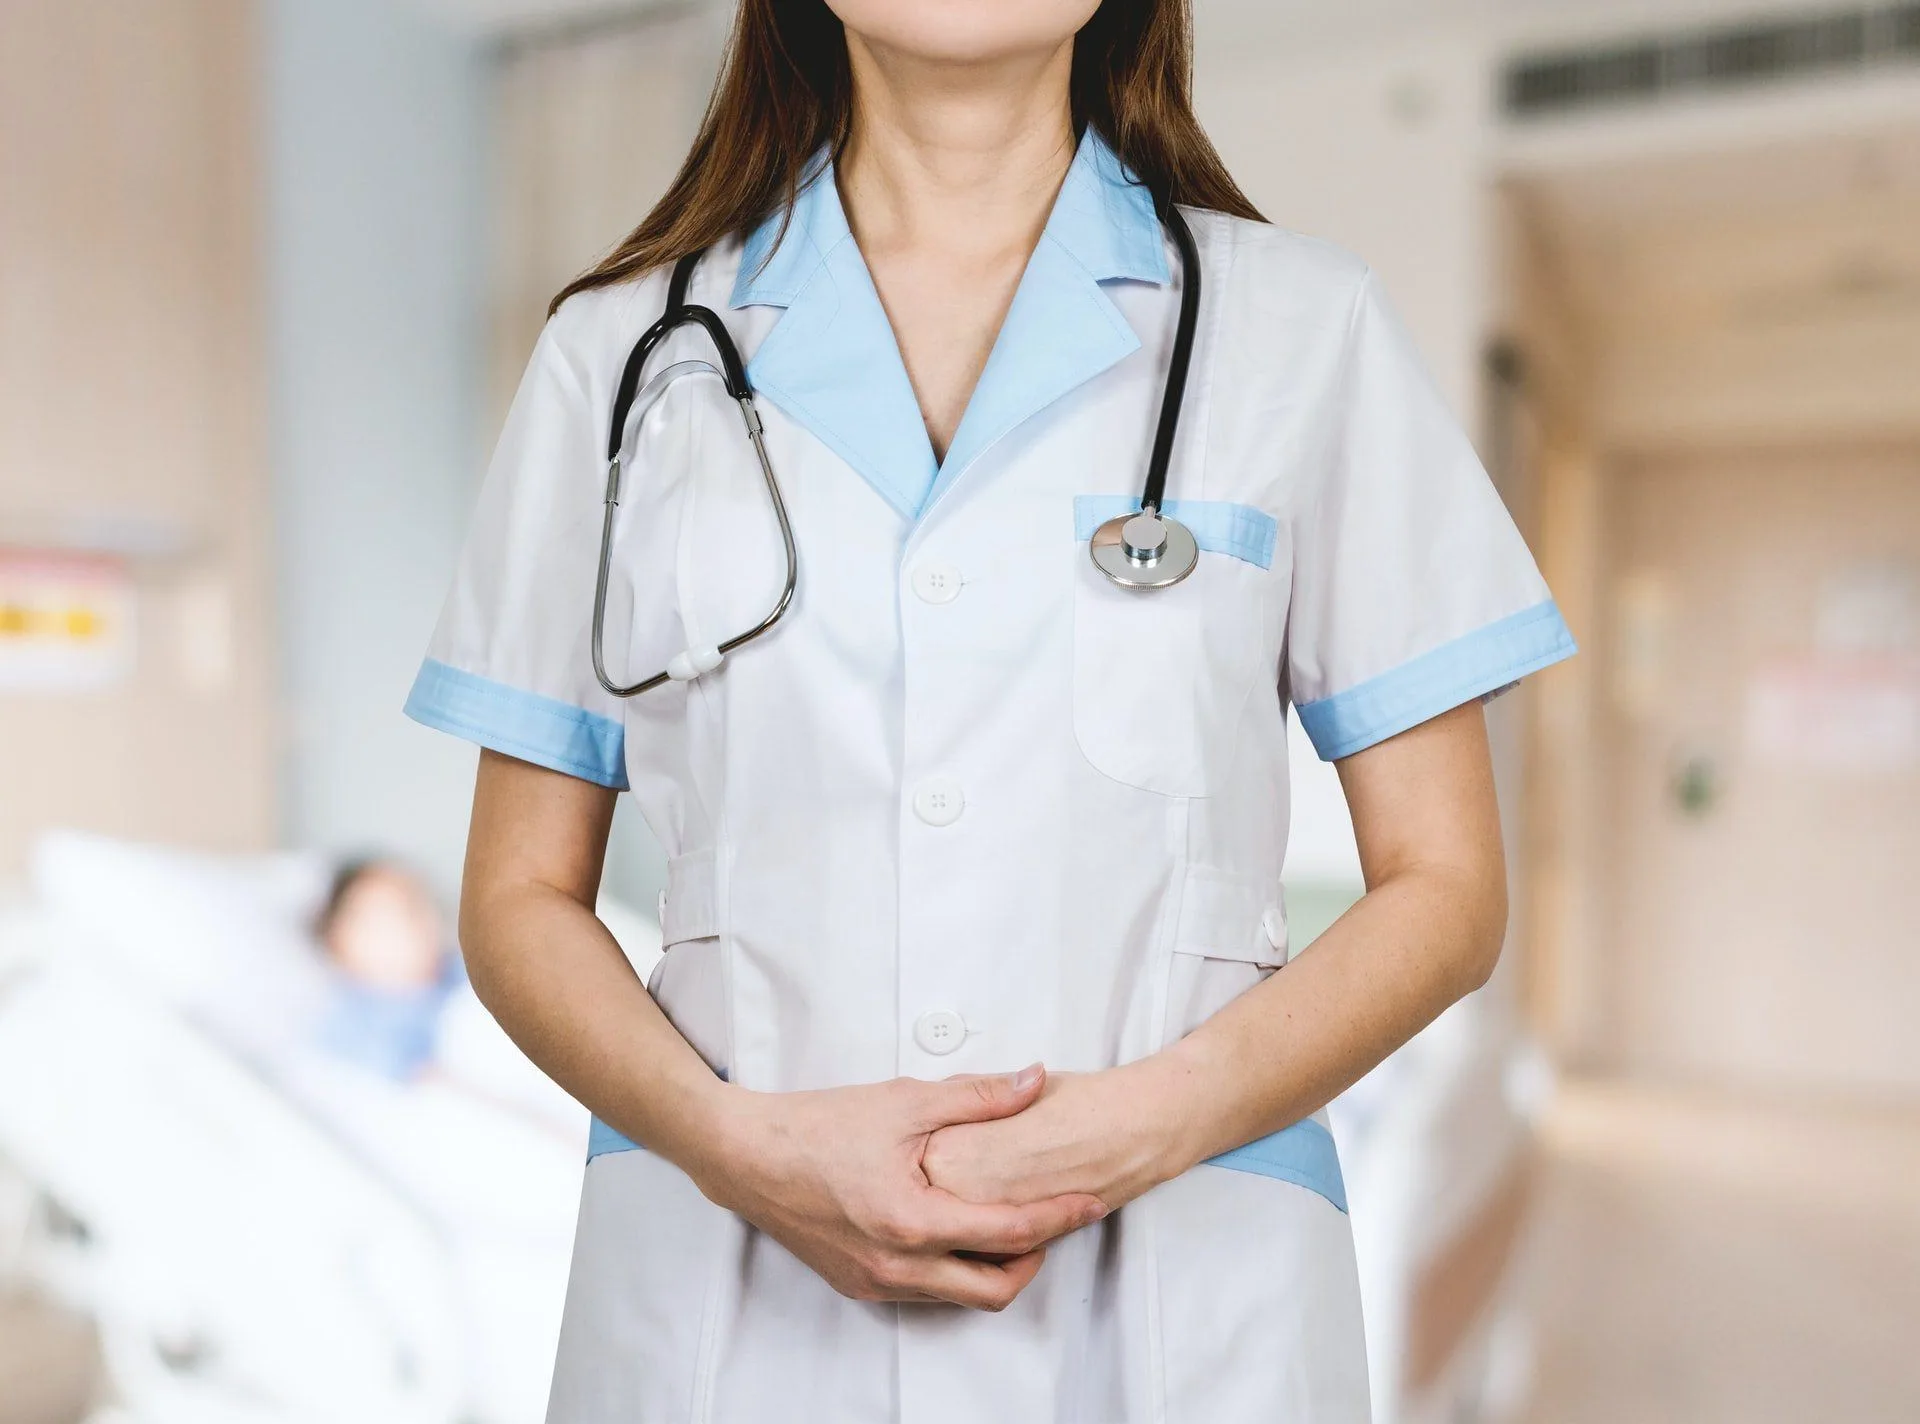 5 Tips For Nurses To Climb The Ladder To Leadership Roles